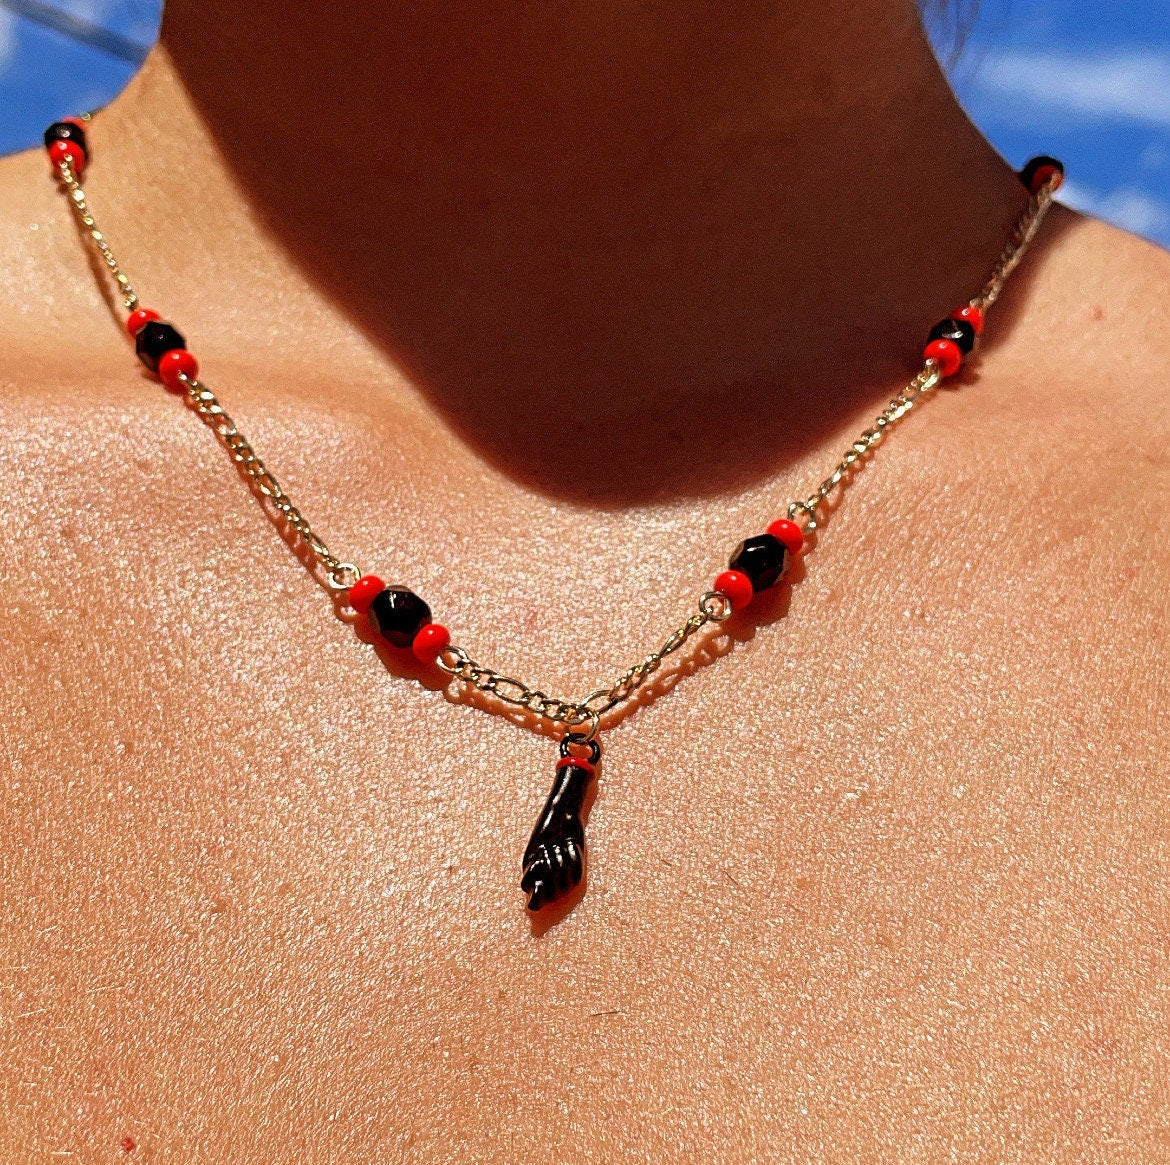 18k Gold Layered Figaro Necklace Featuring Black "Figa", Red Beads, Simulated